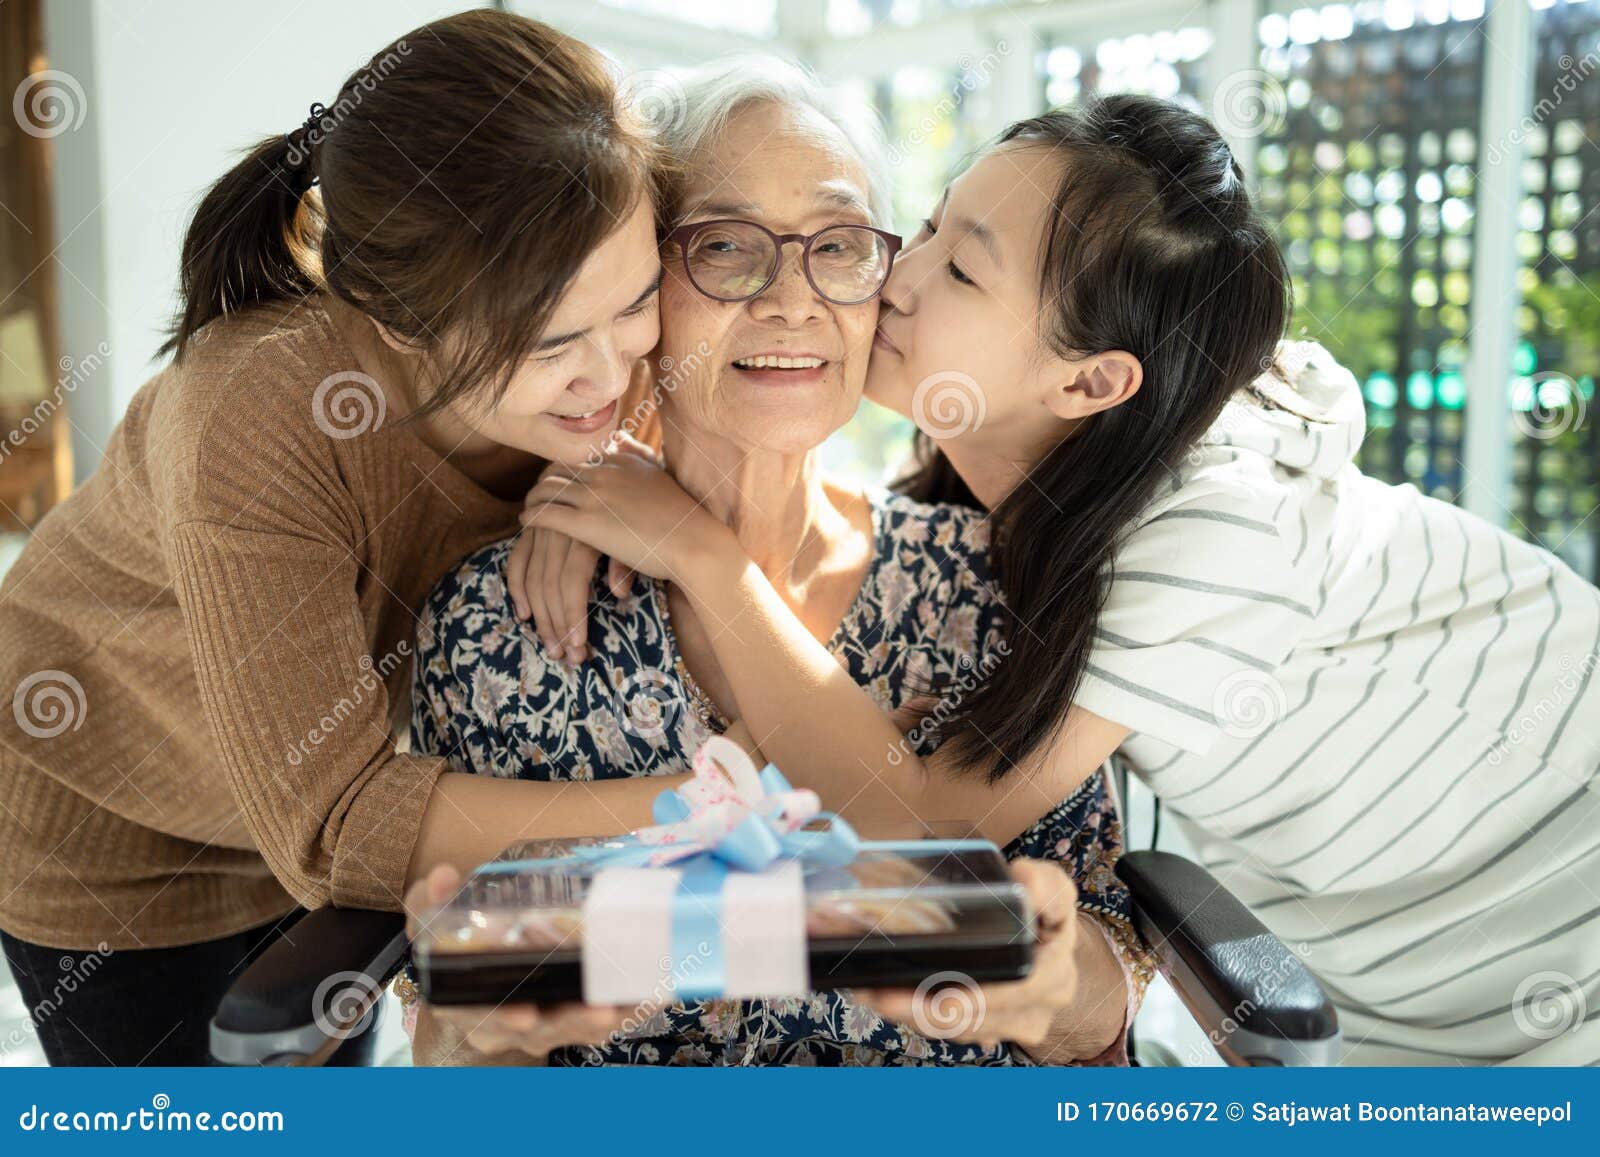 happy asian mother,daughter meeting old grandparent,giving grandmother a gift,hugging,female elderly hold  present box,woman,child